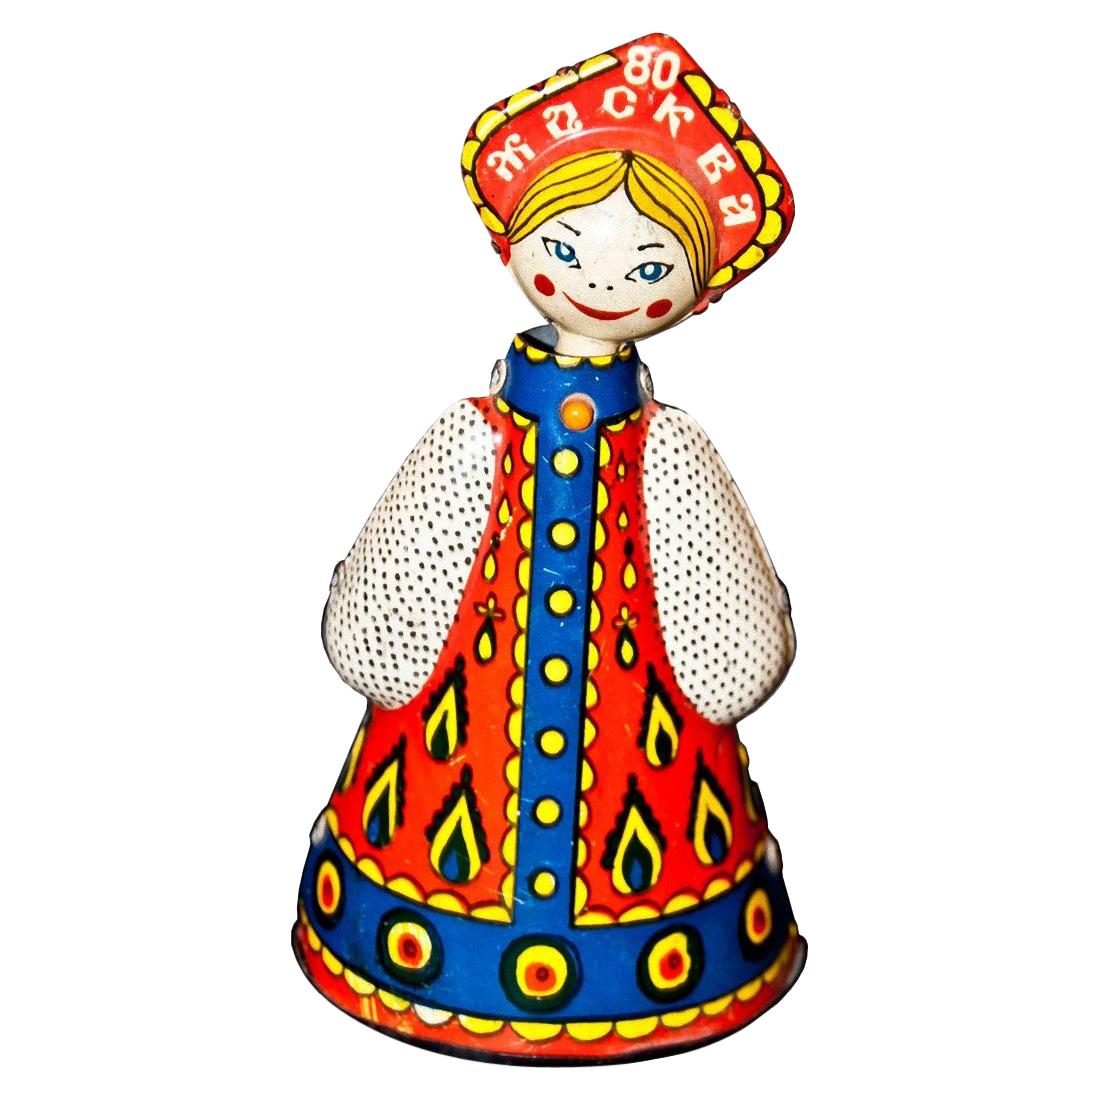 Vintage Toy, Dancing Russian Doll, Moscow Olympics, 1980